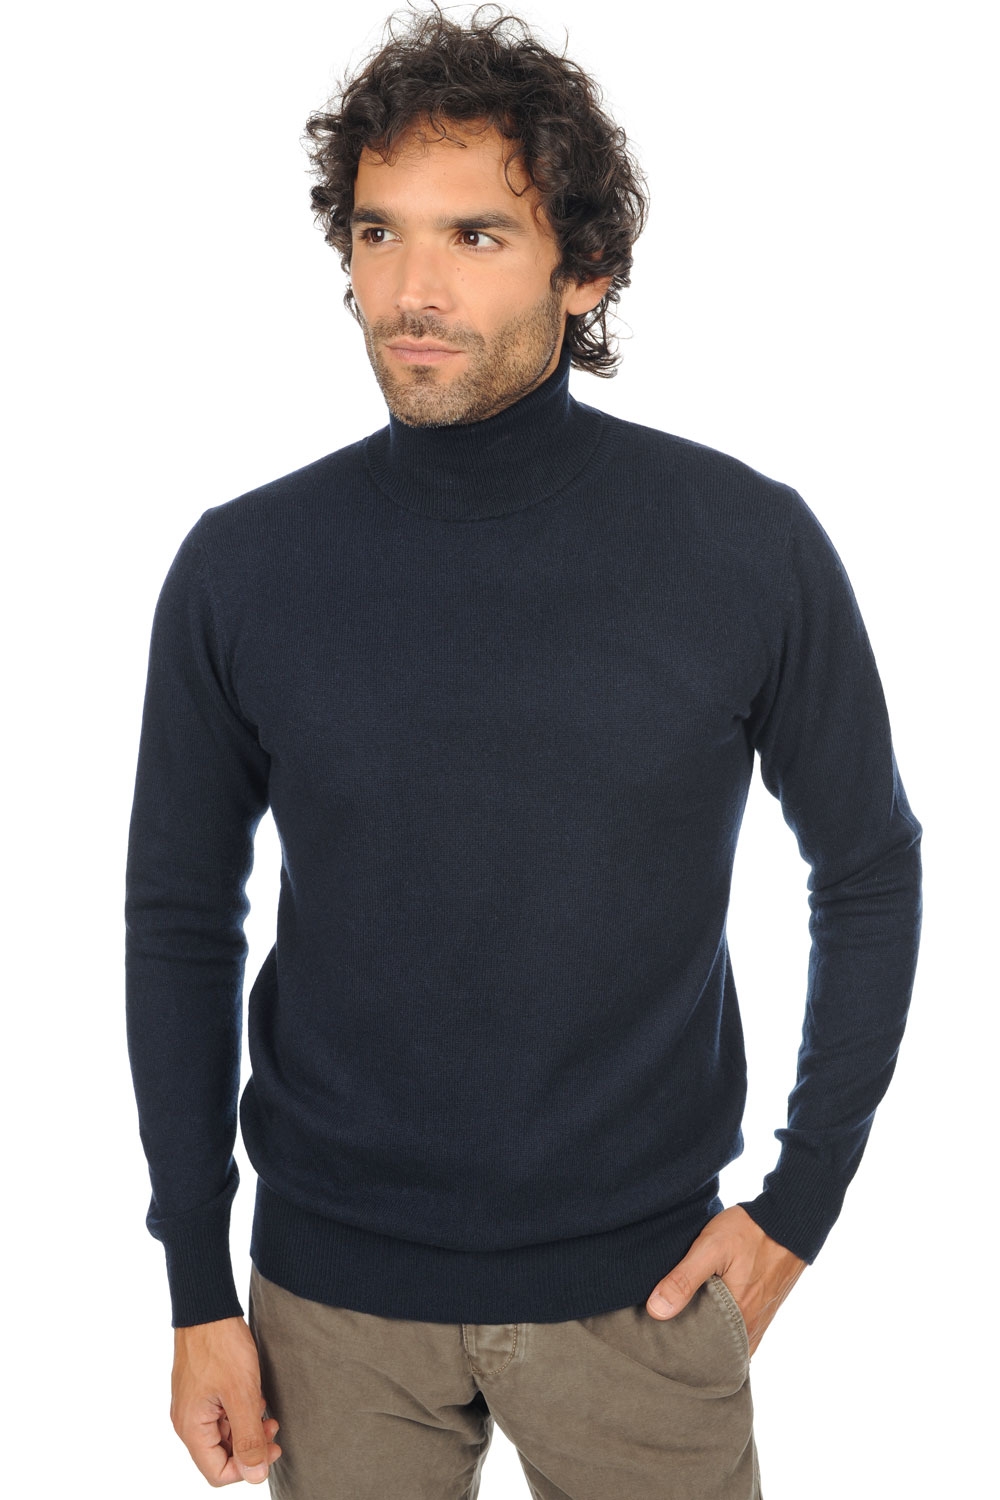 Cachemire petits prix homme tarry first marine fonce xl